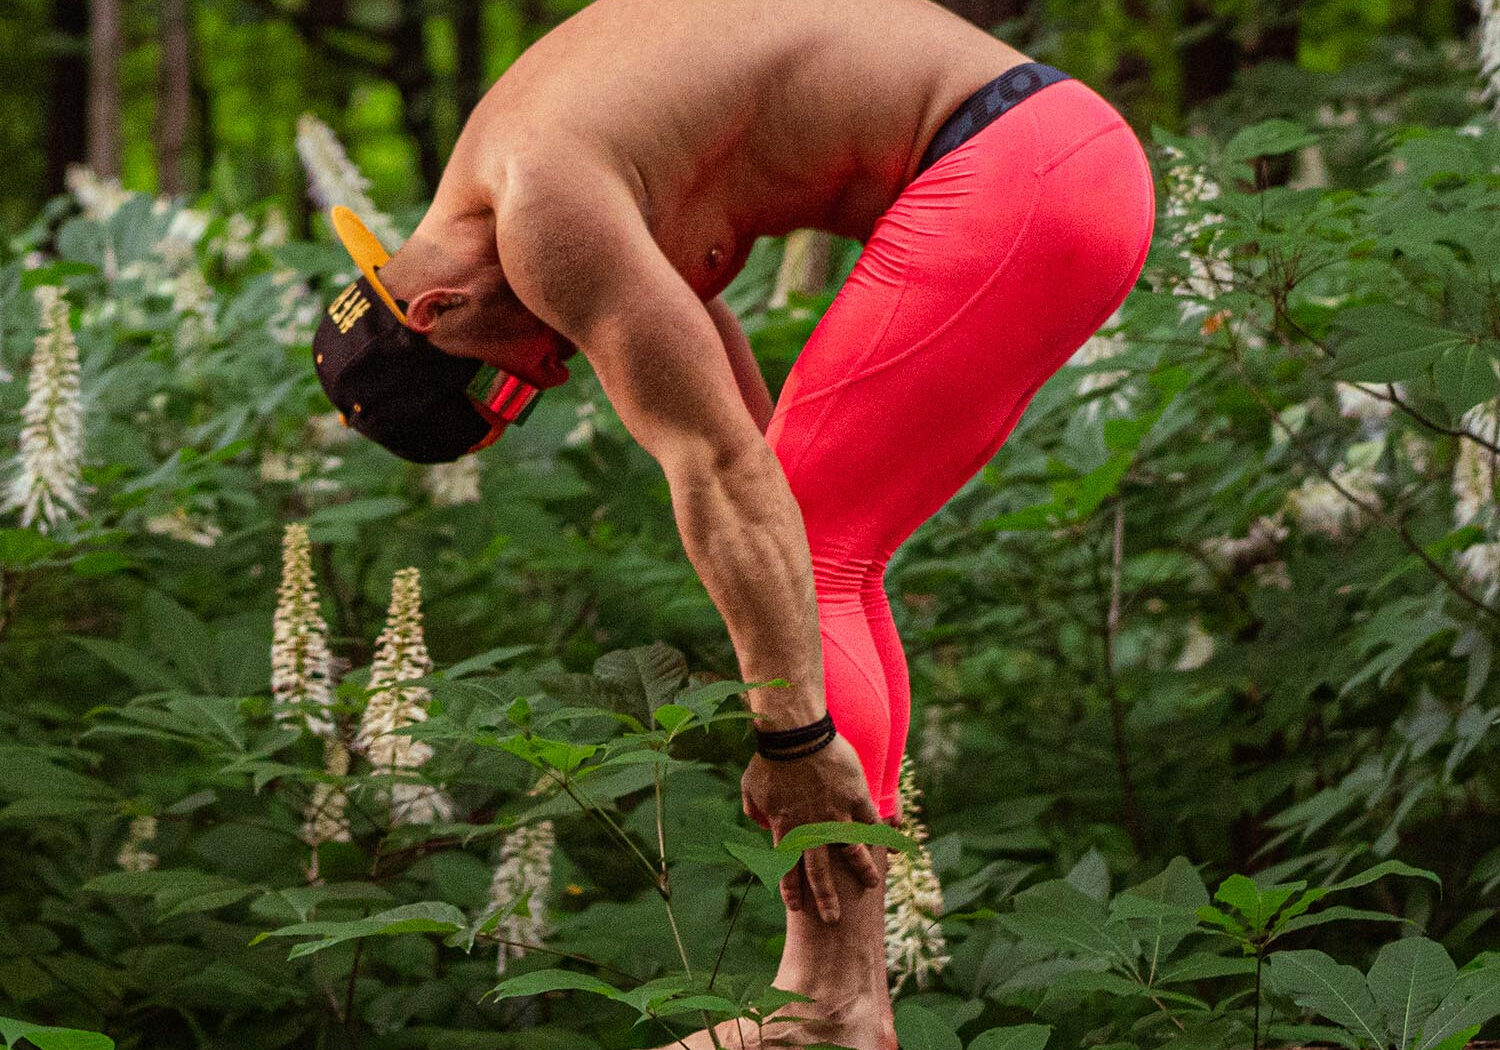 Finding Healing Solitude and Balance through Yoga – Wellness Travel in the Hudson Valley and Catskills – Outdoor Yoga with Coach Maxwell Alexander – Presented by Alluvion Vacations